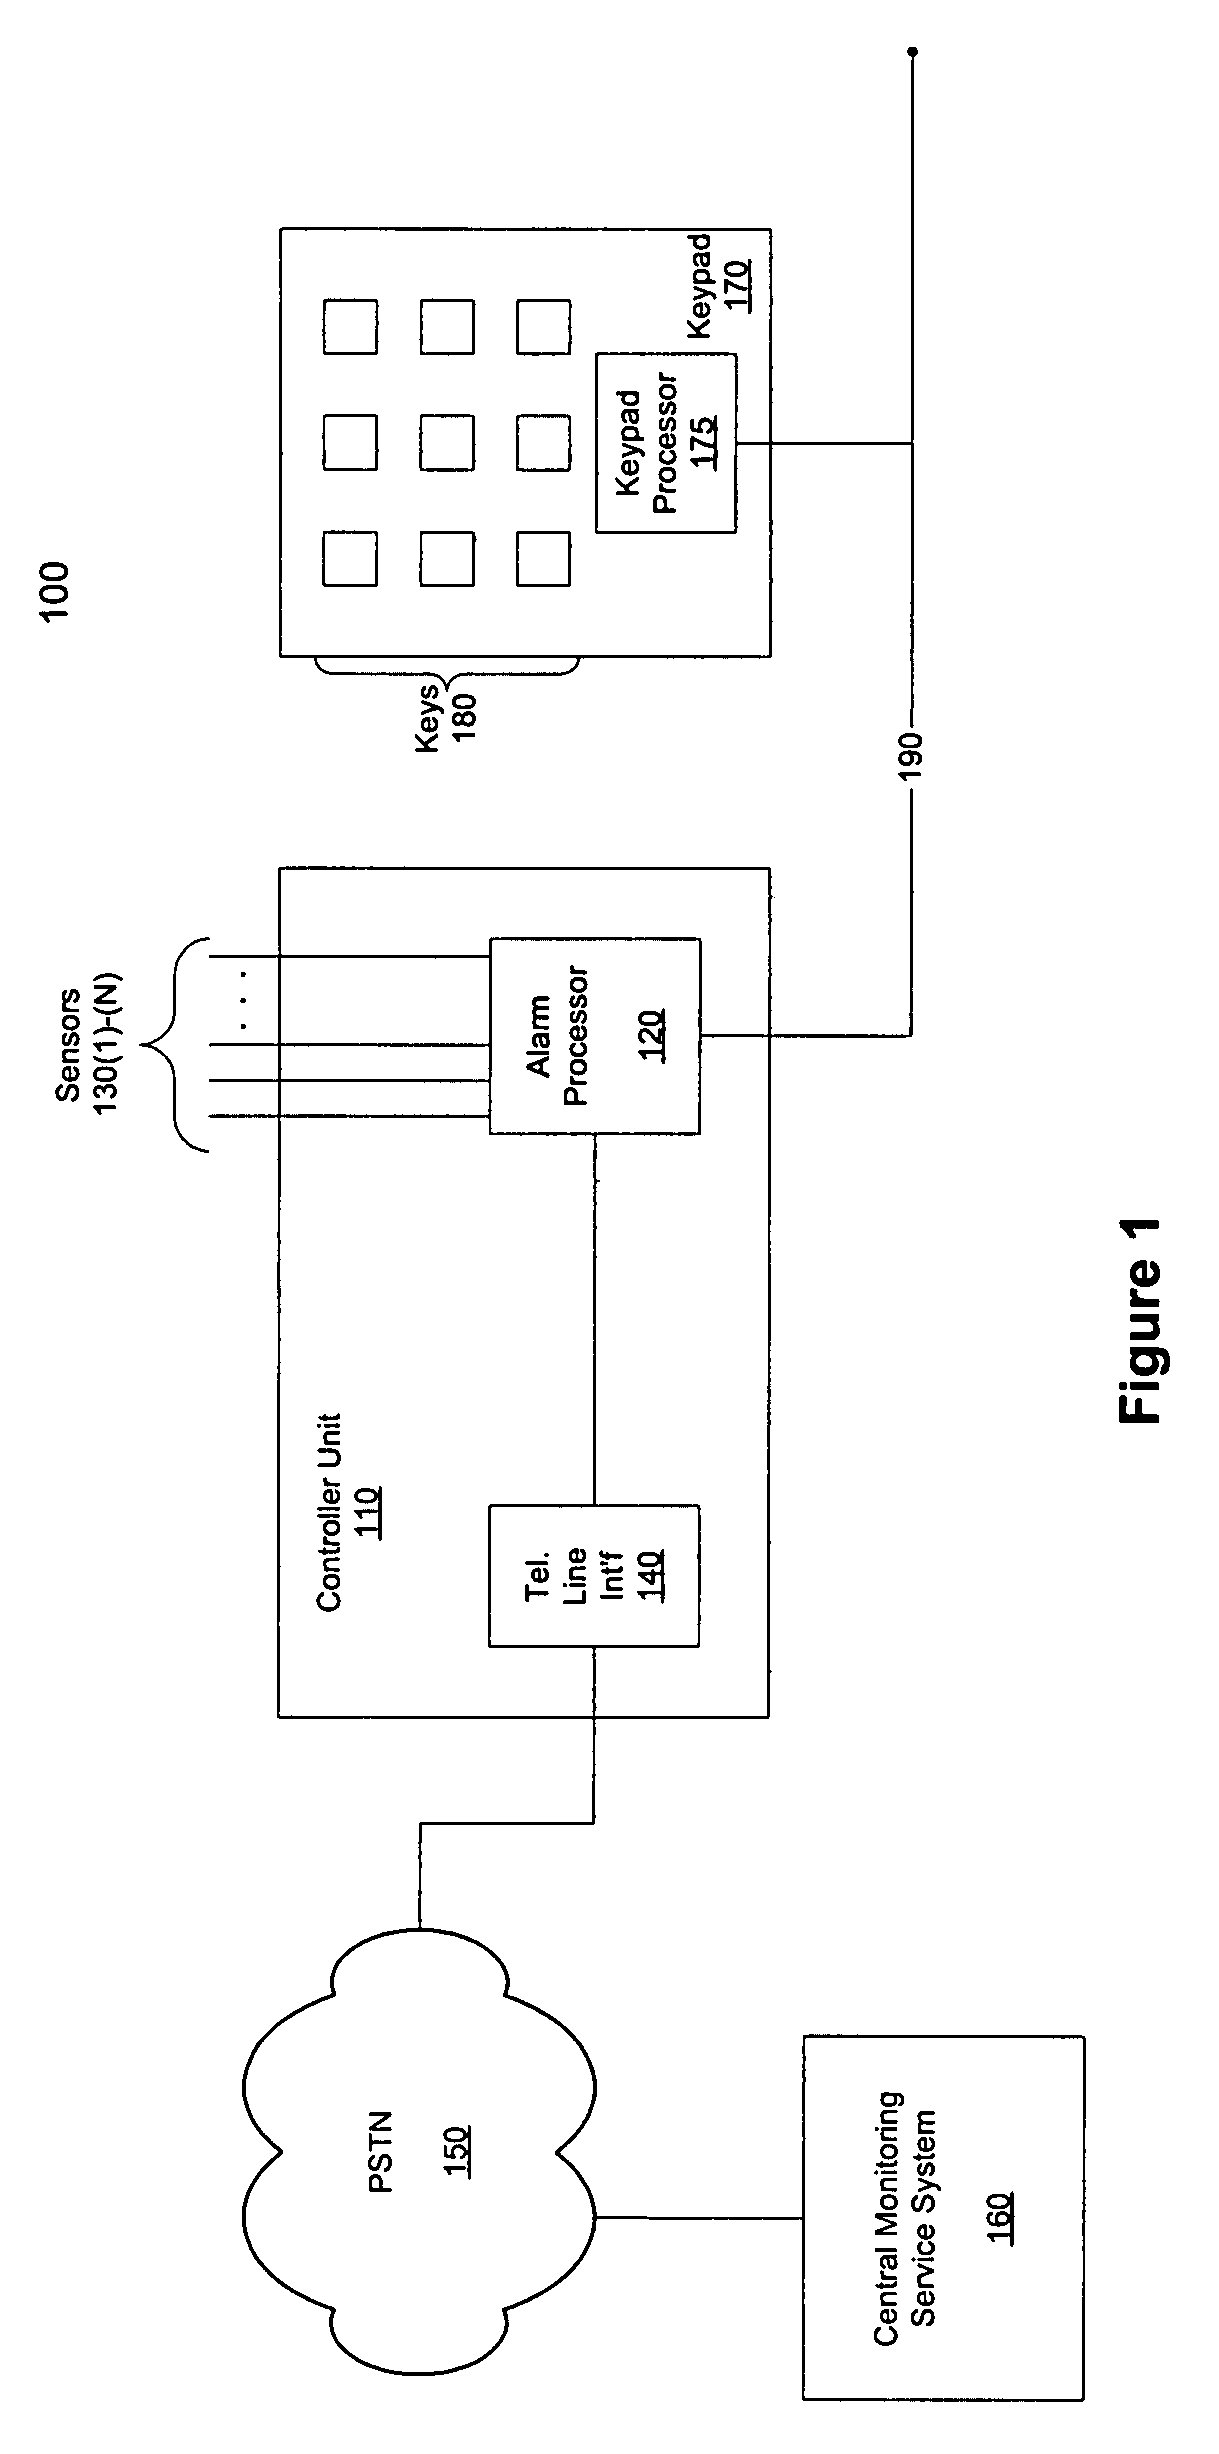 Method and system for communicating with and controlling an alarm system from a remote server